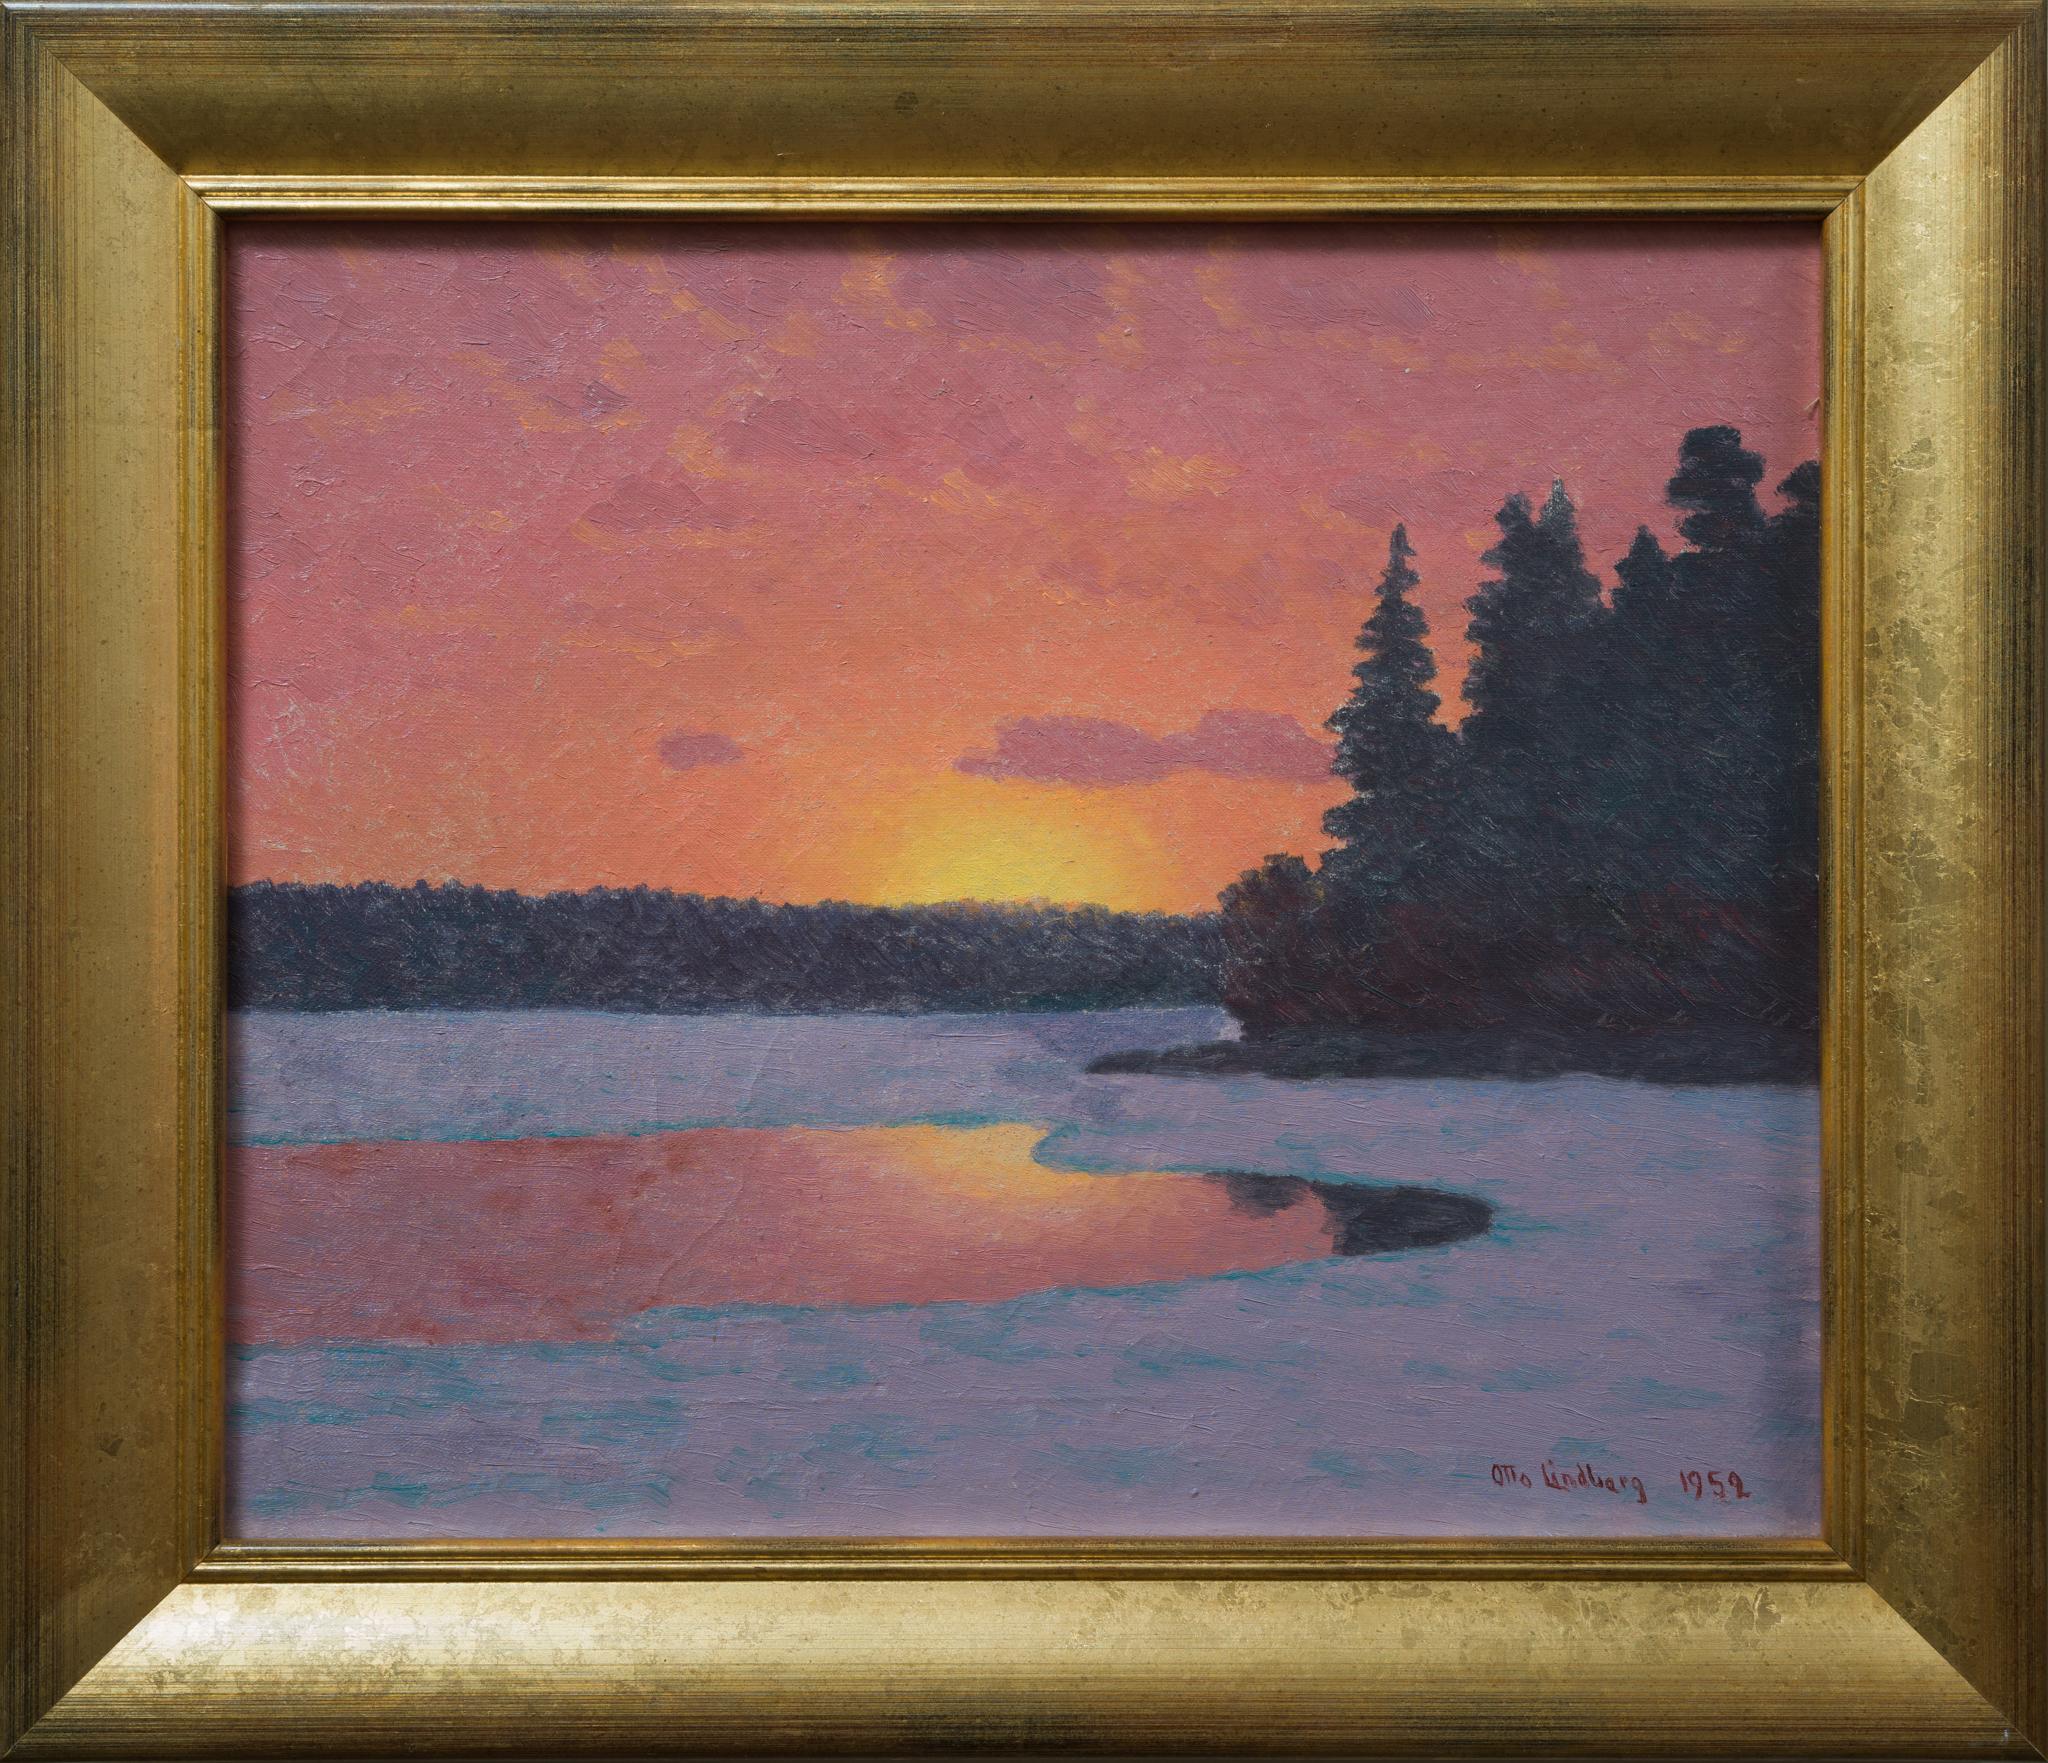 A Spring Sunset, Original Oil Painting from 1952